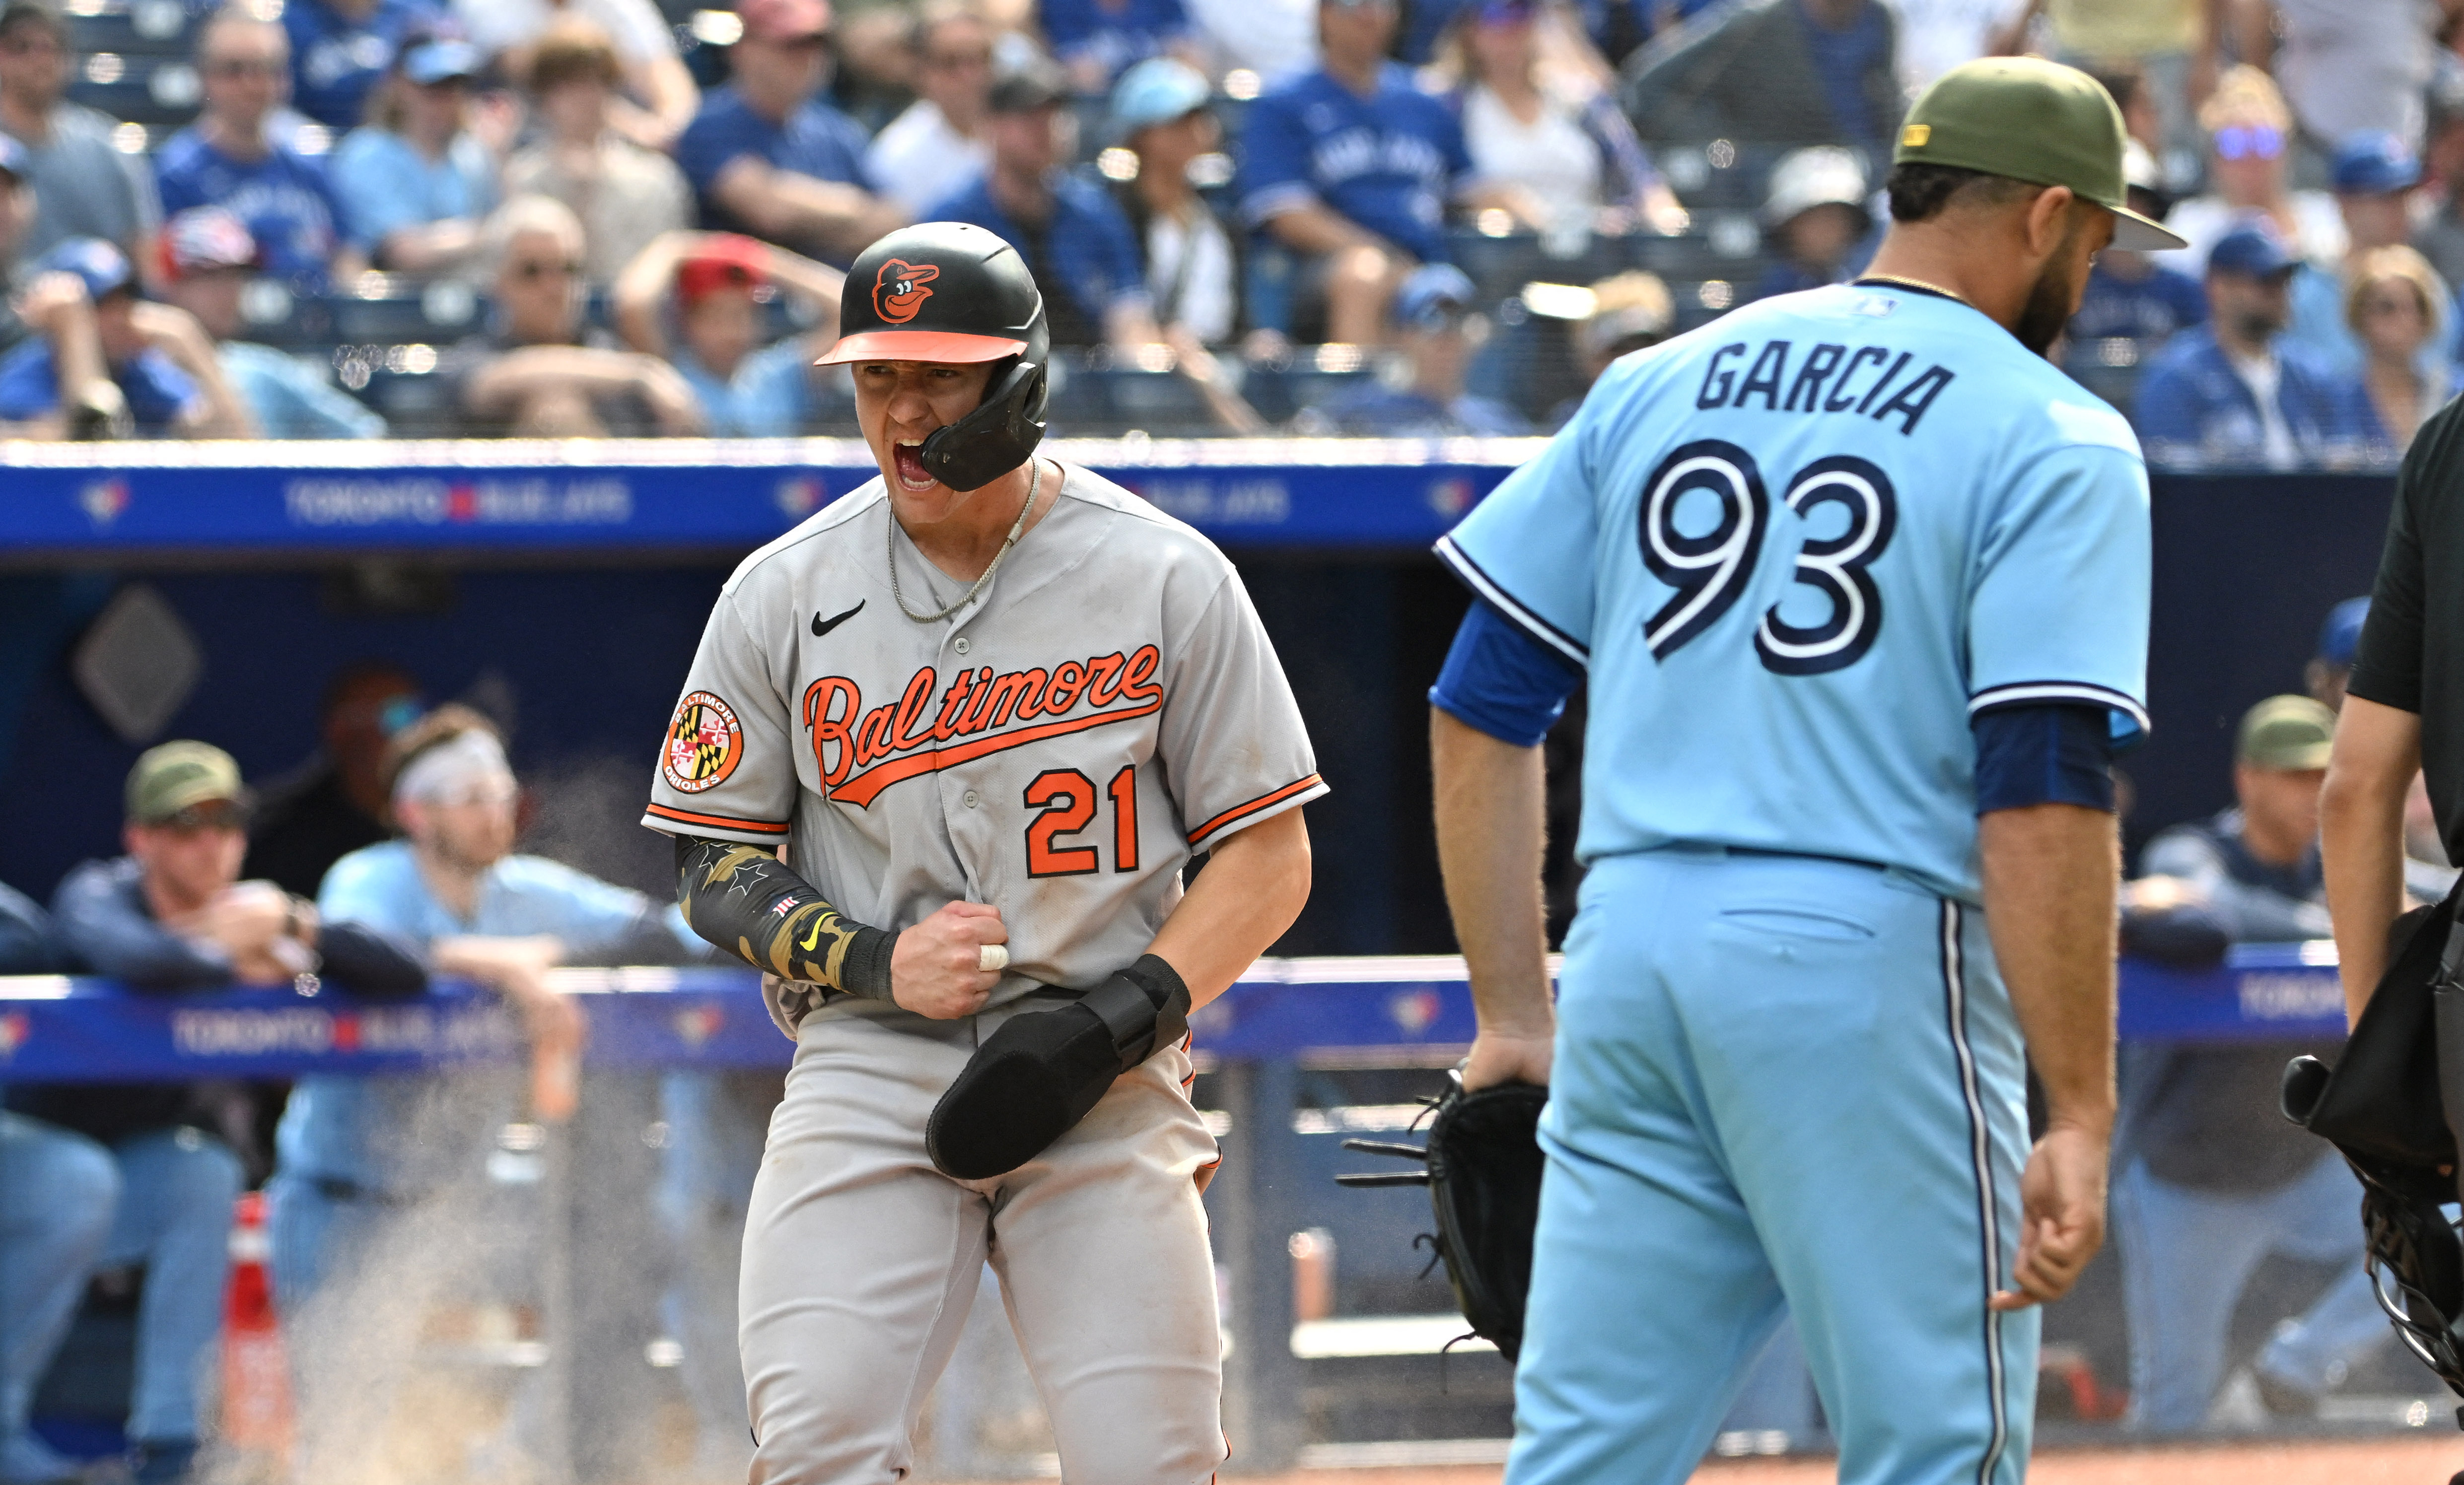 Mullins' 11th-inning sacrifice fly lifts Orioles over Rays after both teams  clinch postseason spots - The San Diego Union-Tribune